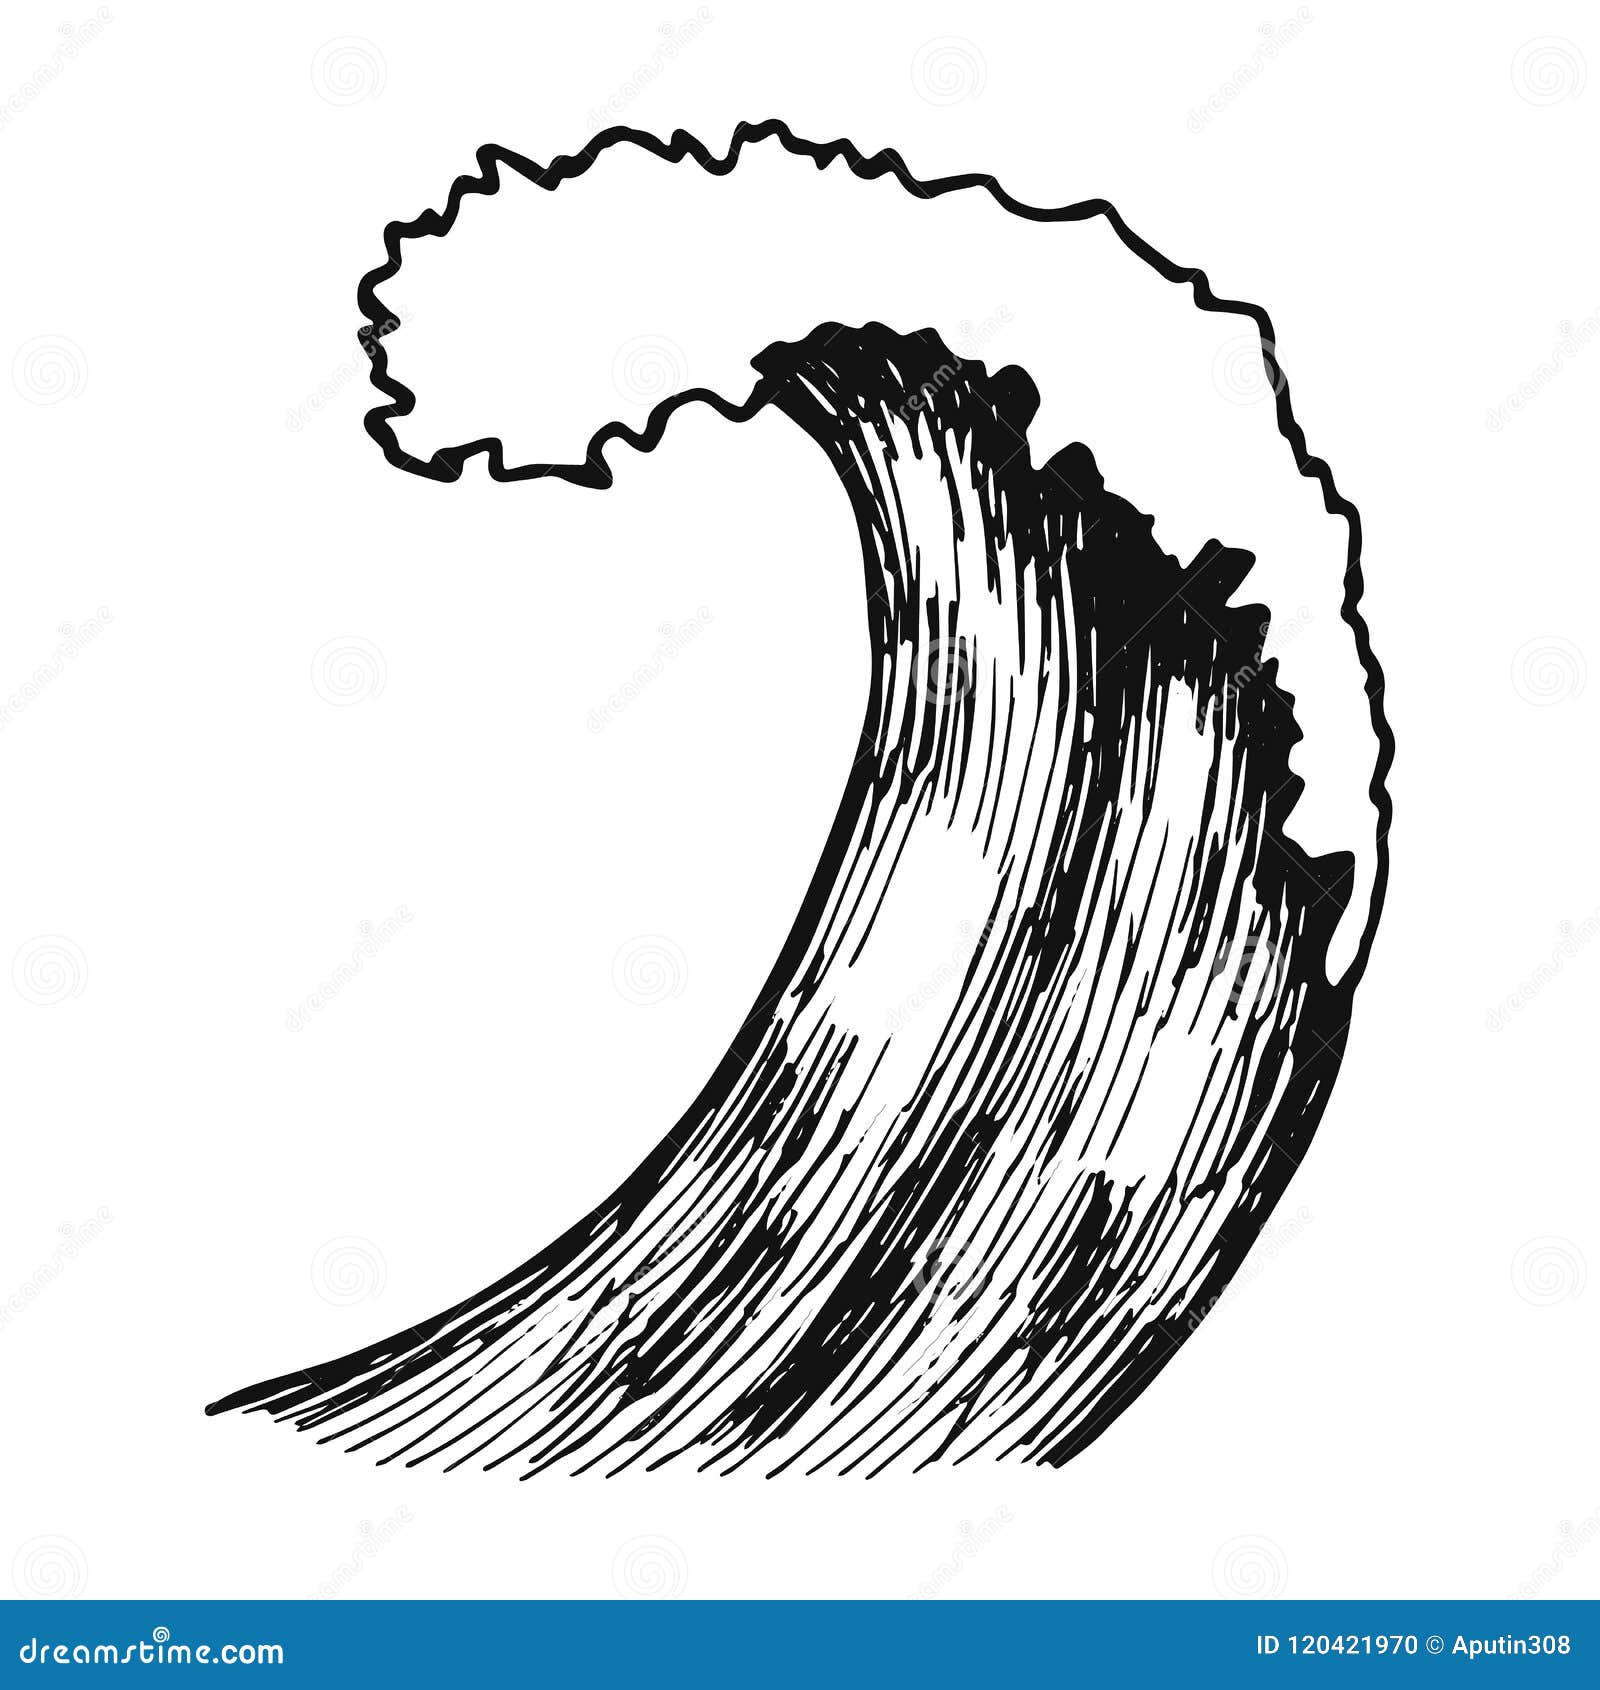 How to Draw a Japanese Wave - HelloArtsy